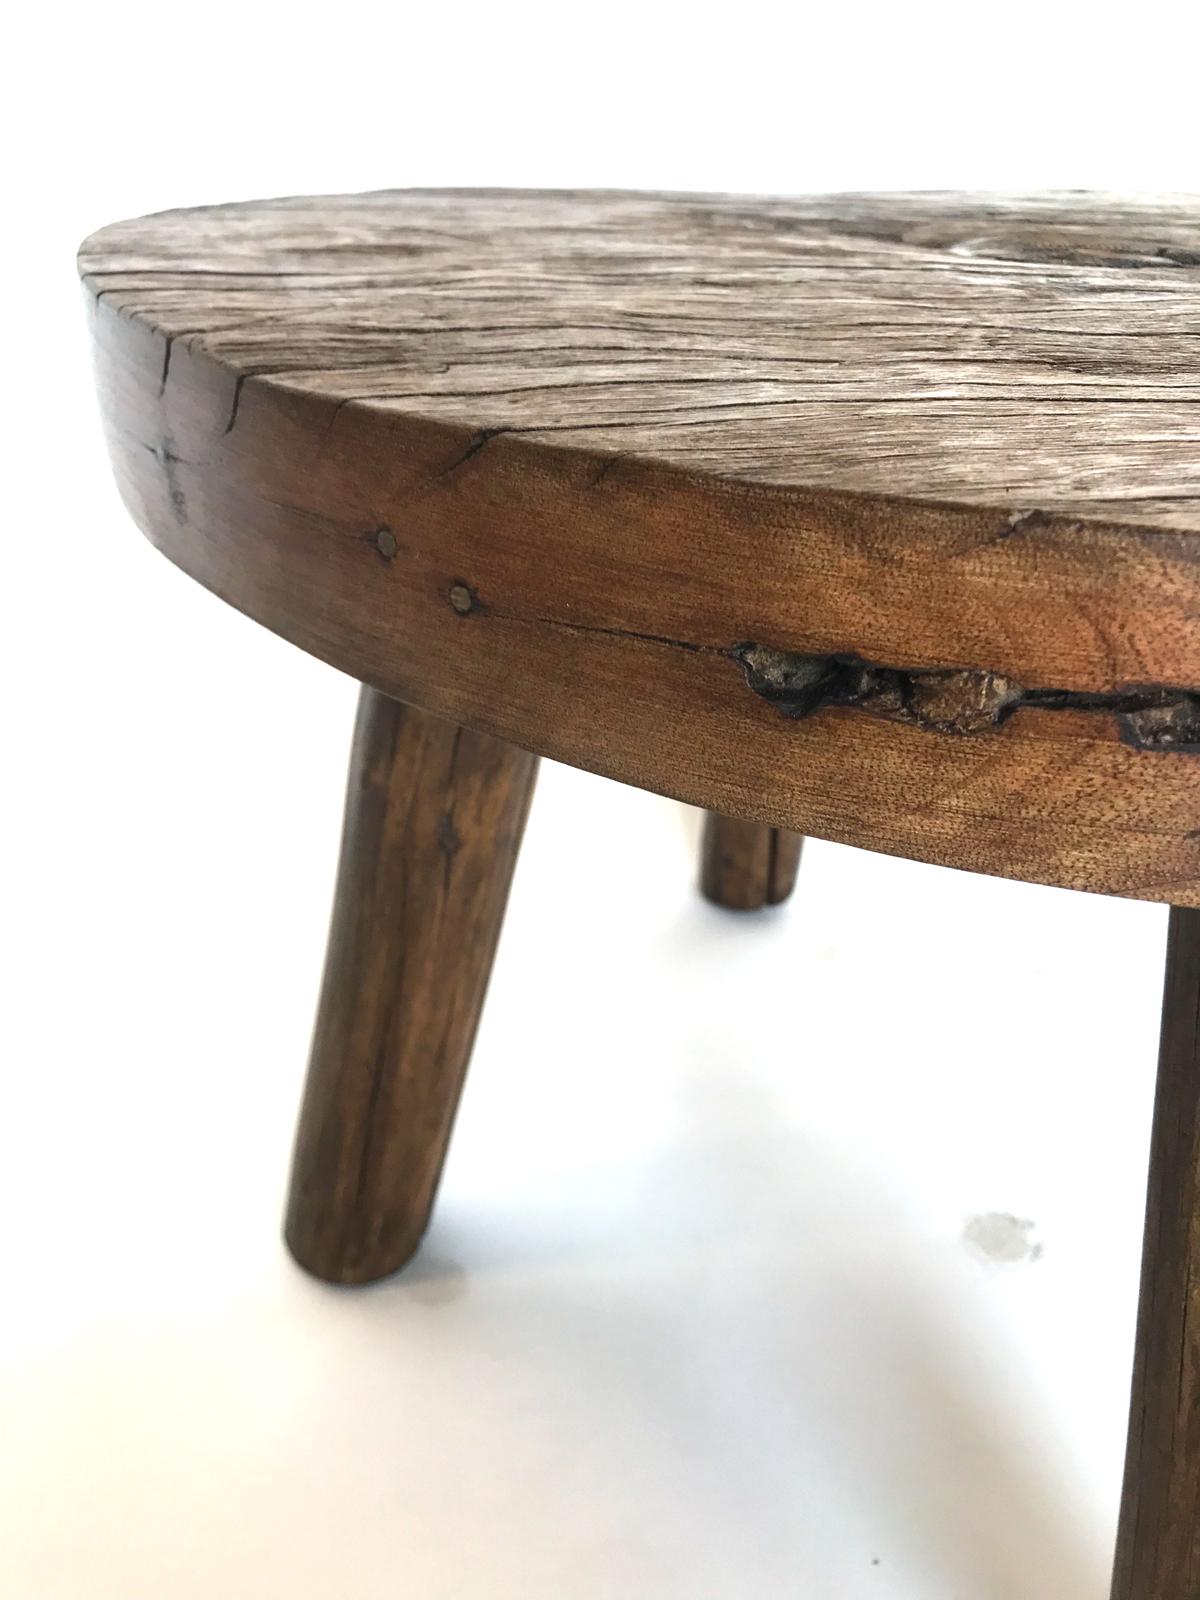 Rustic Antique Wooden Wheel Table 2